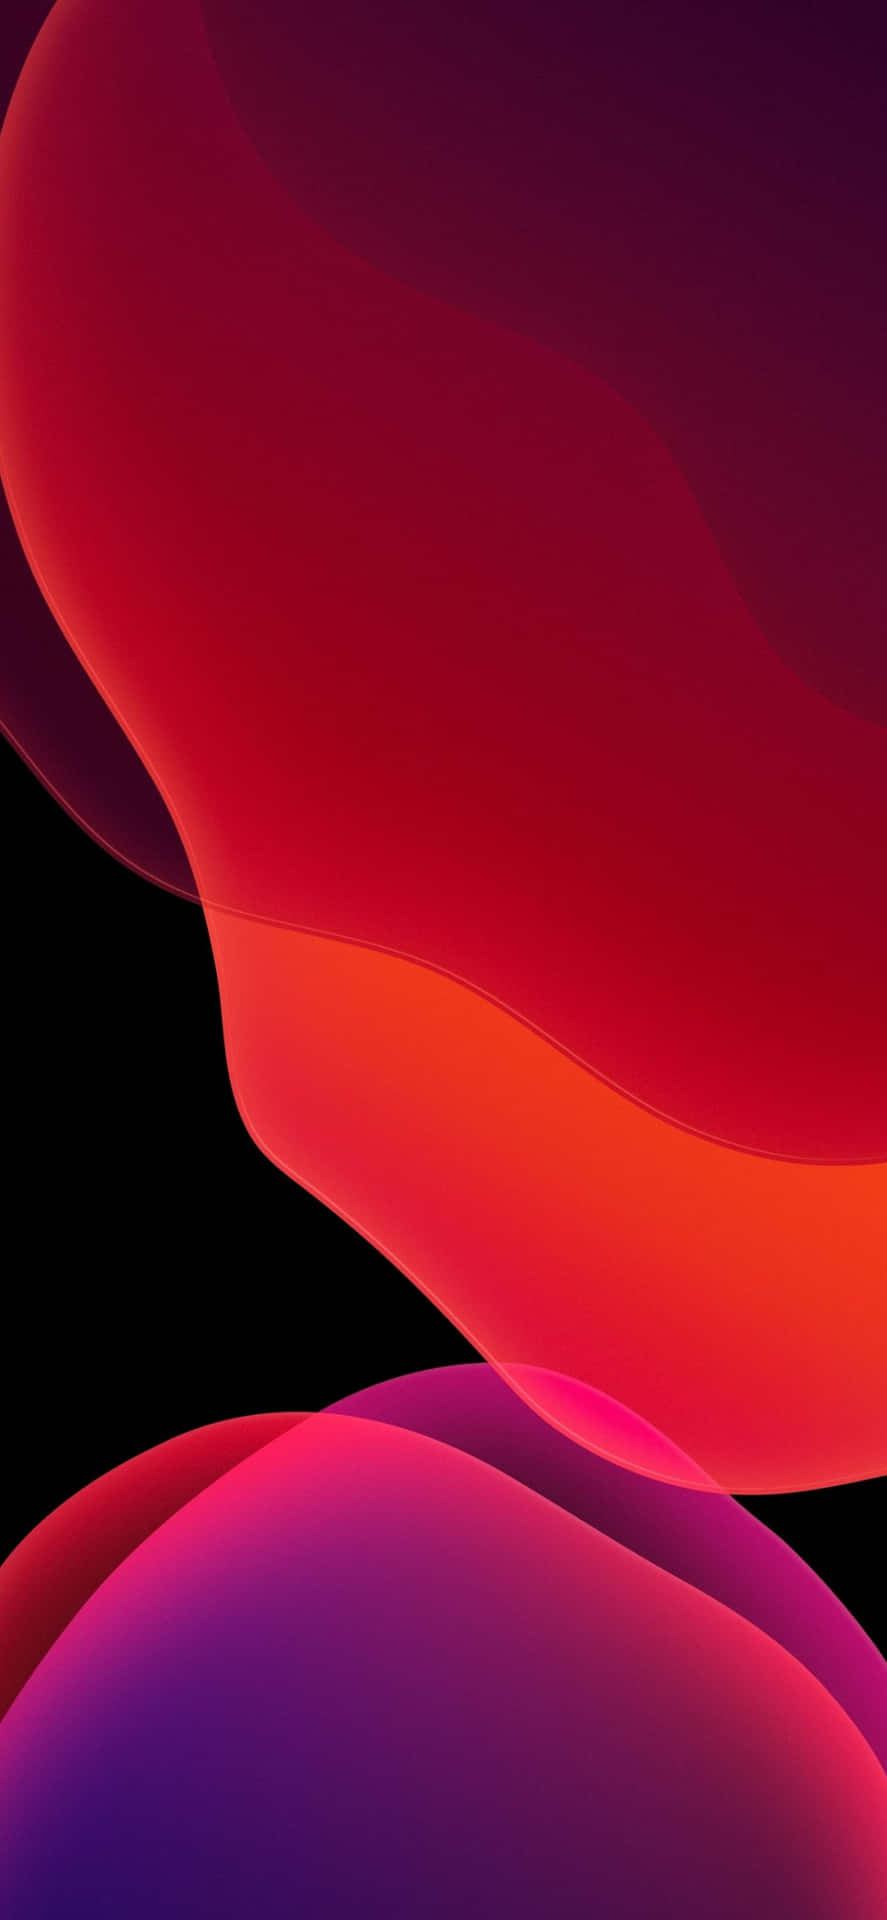 A Red And Purple Abstract Background